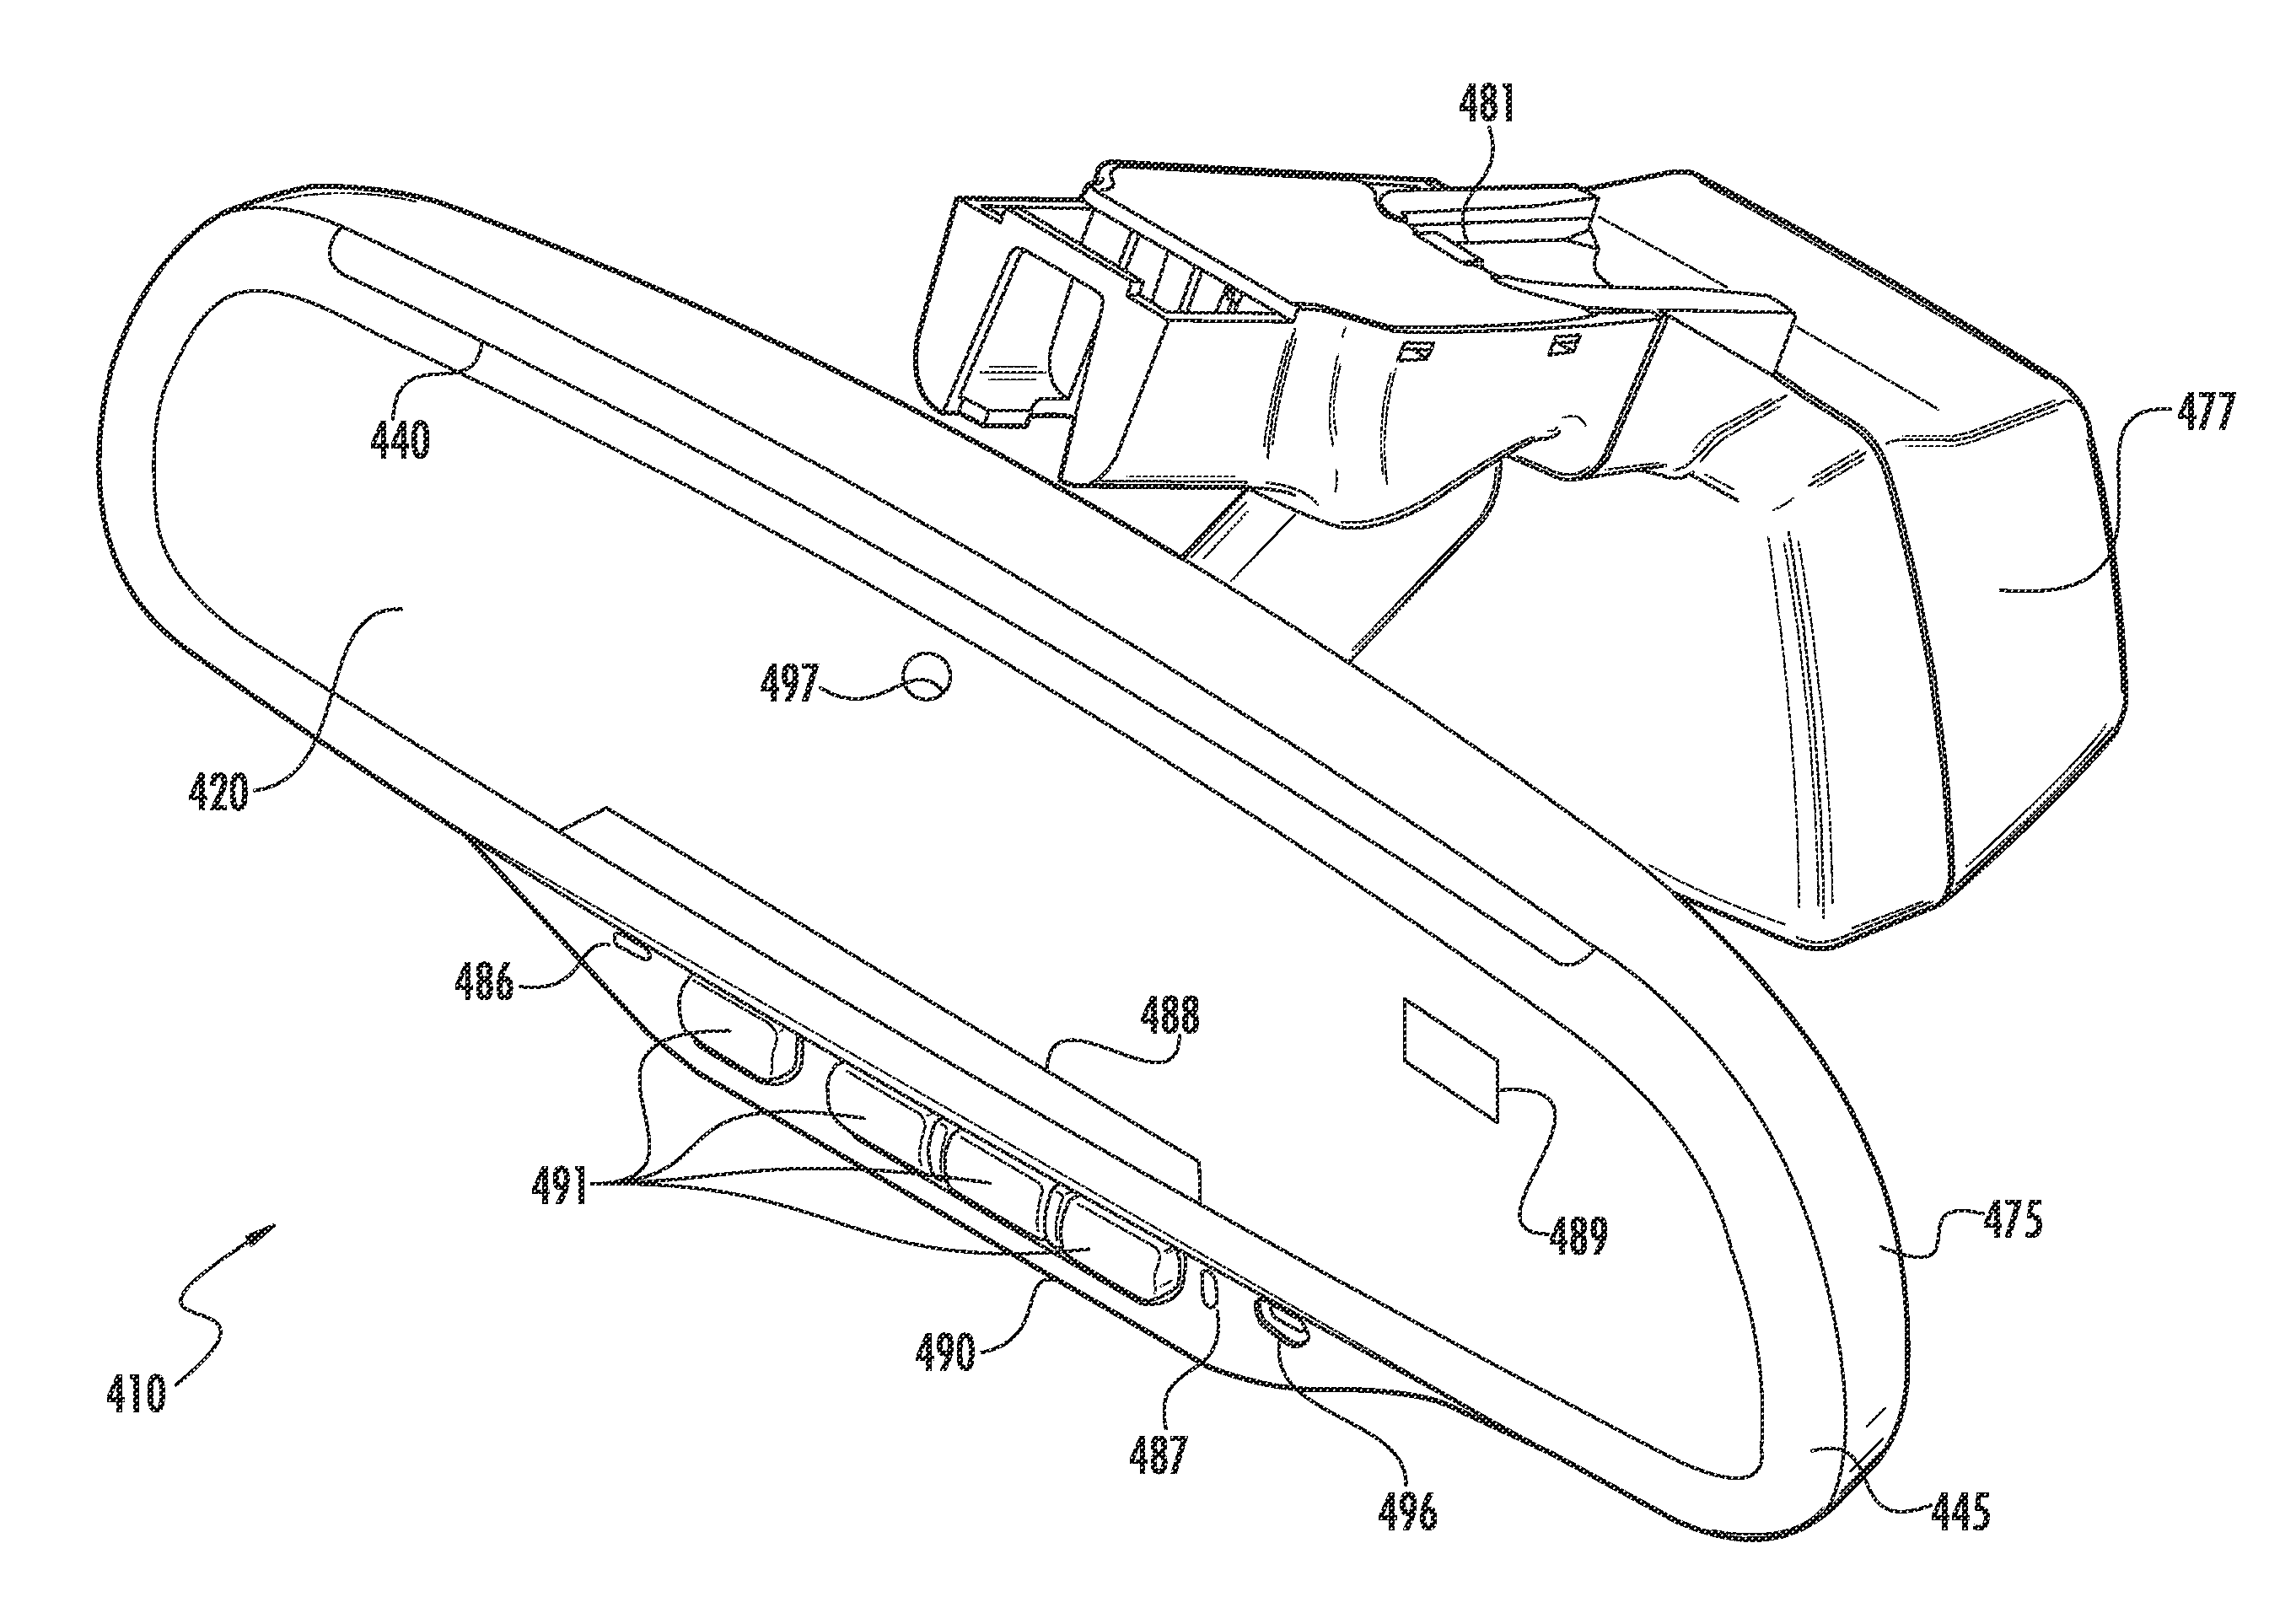 Automotive rearview mirror with capacitive switches